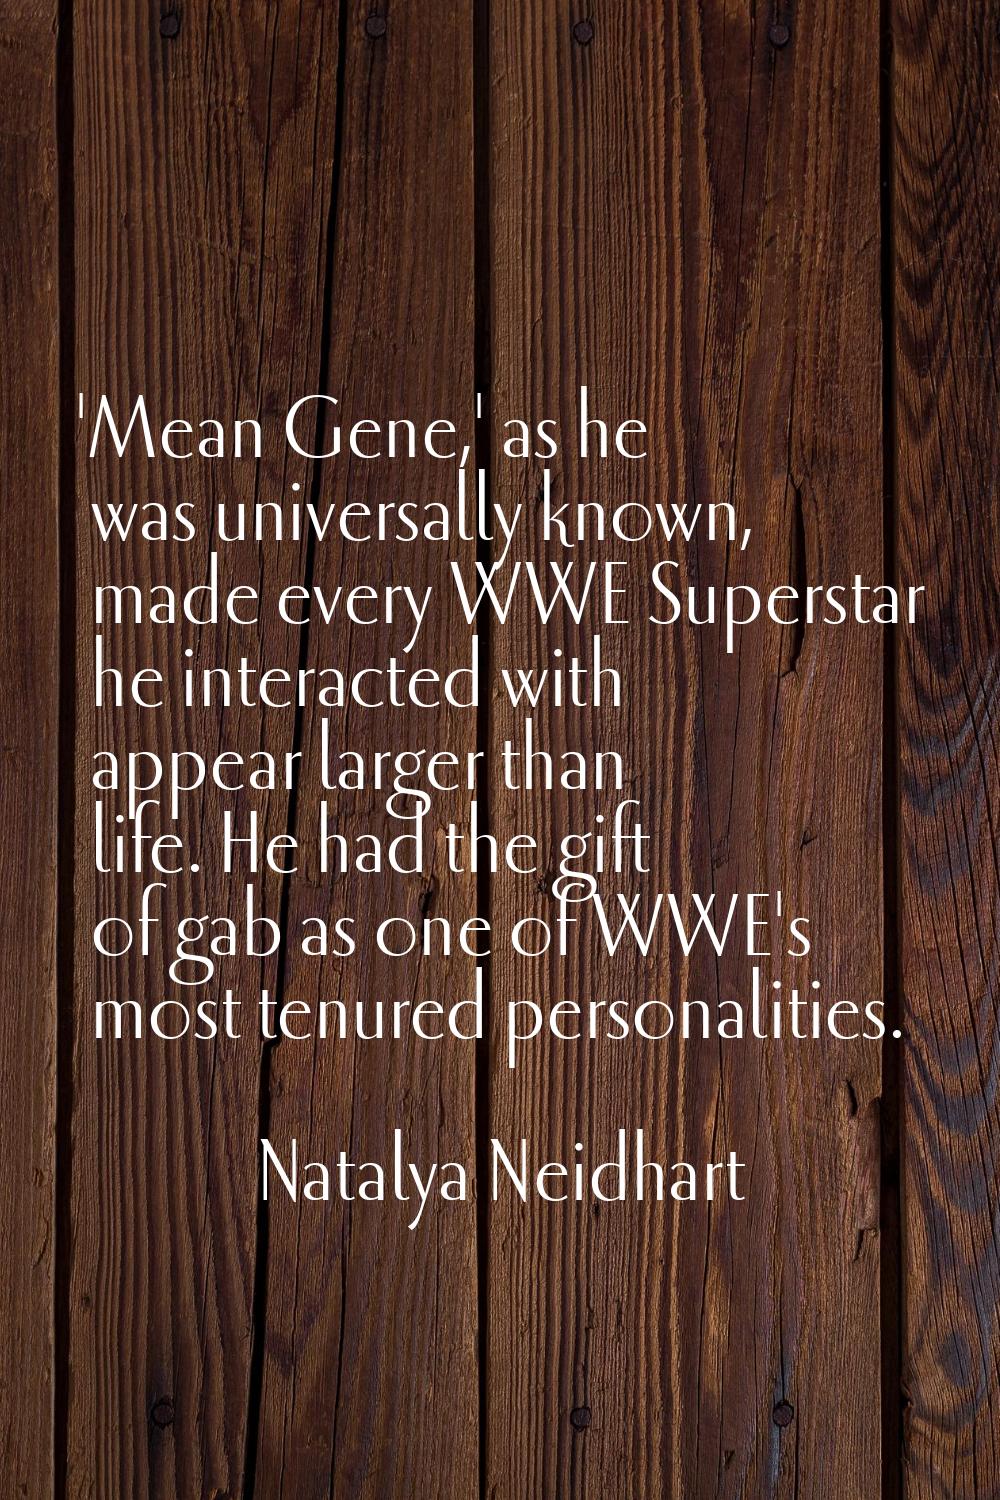 'Mean Gene,' as he was universally known, made every WWE Superstar he interacted with appear larger